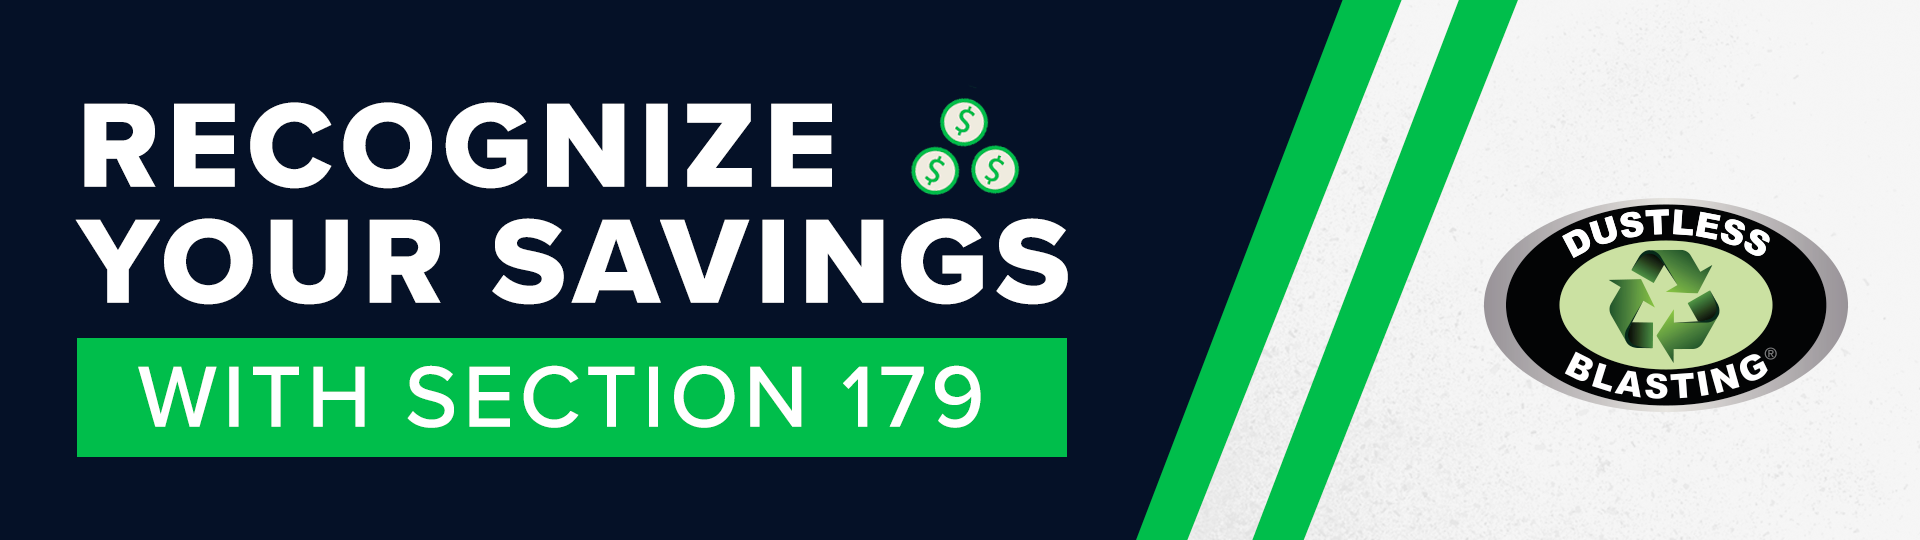 Recognize your savings with section 179